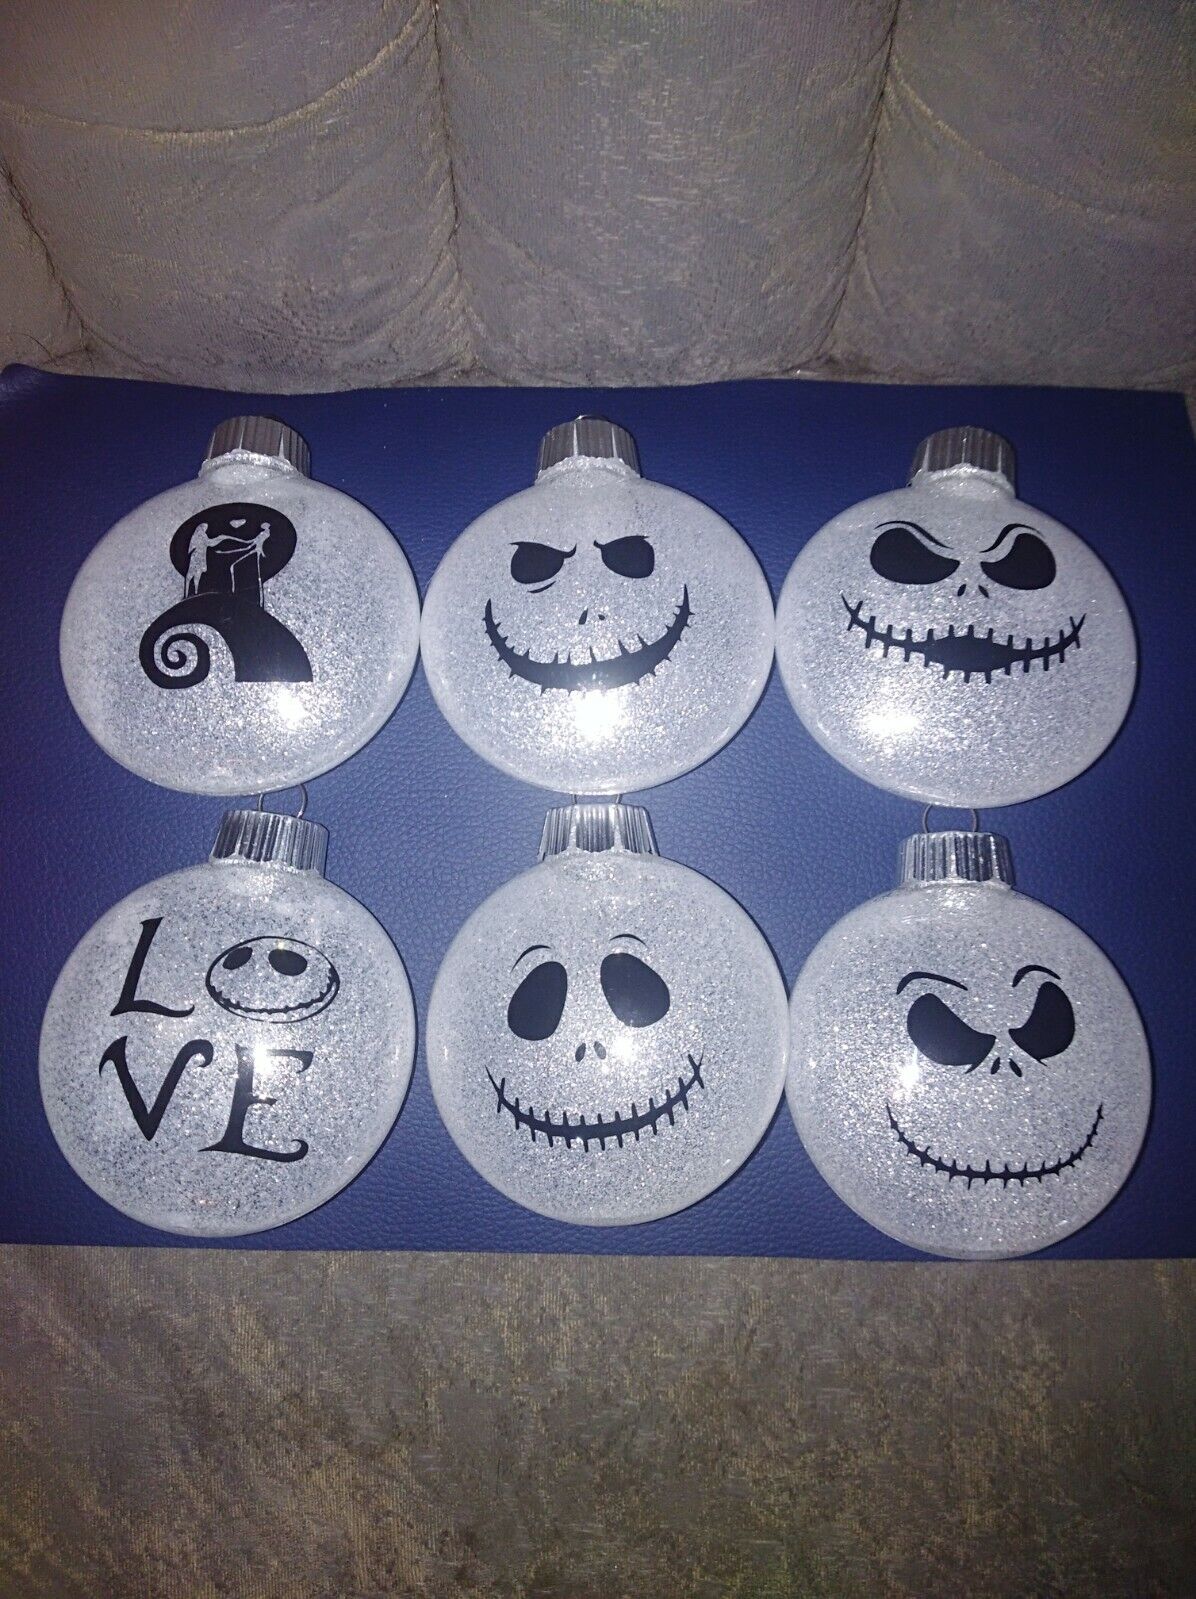 Nightmare before christmas ornaments (6pc set) disc ornaments Unbranded